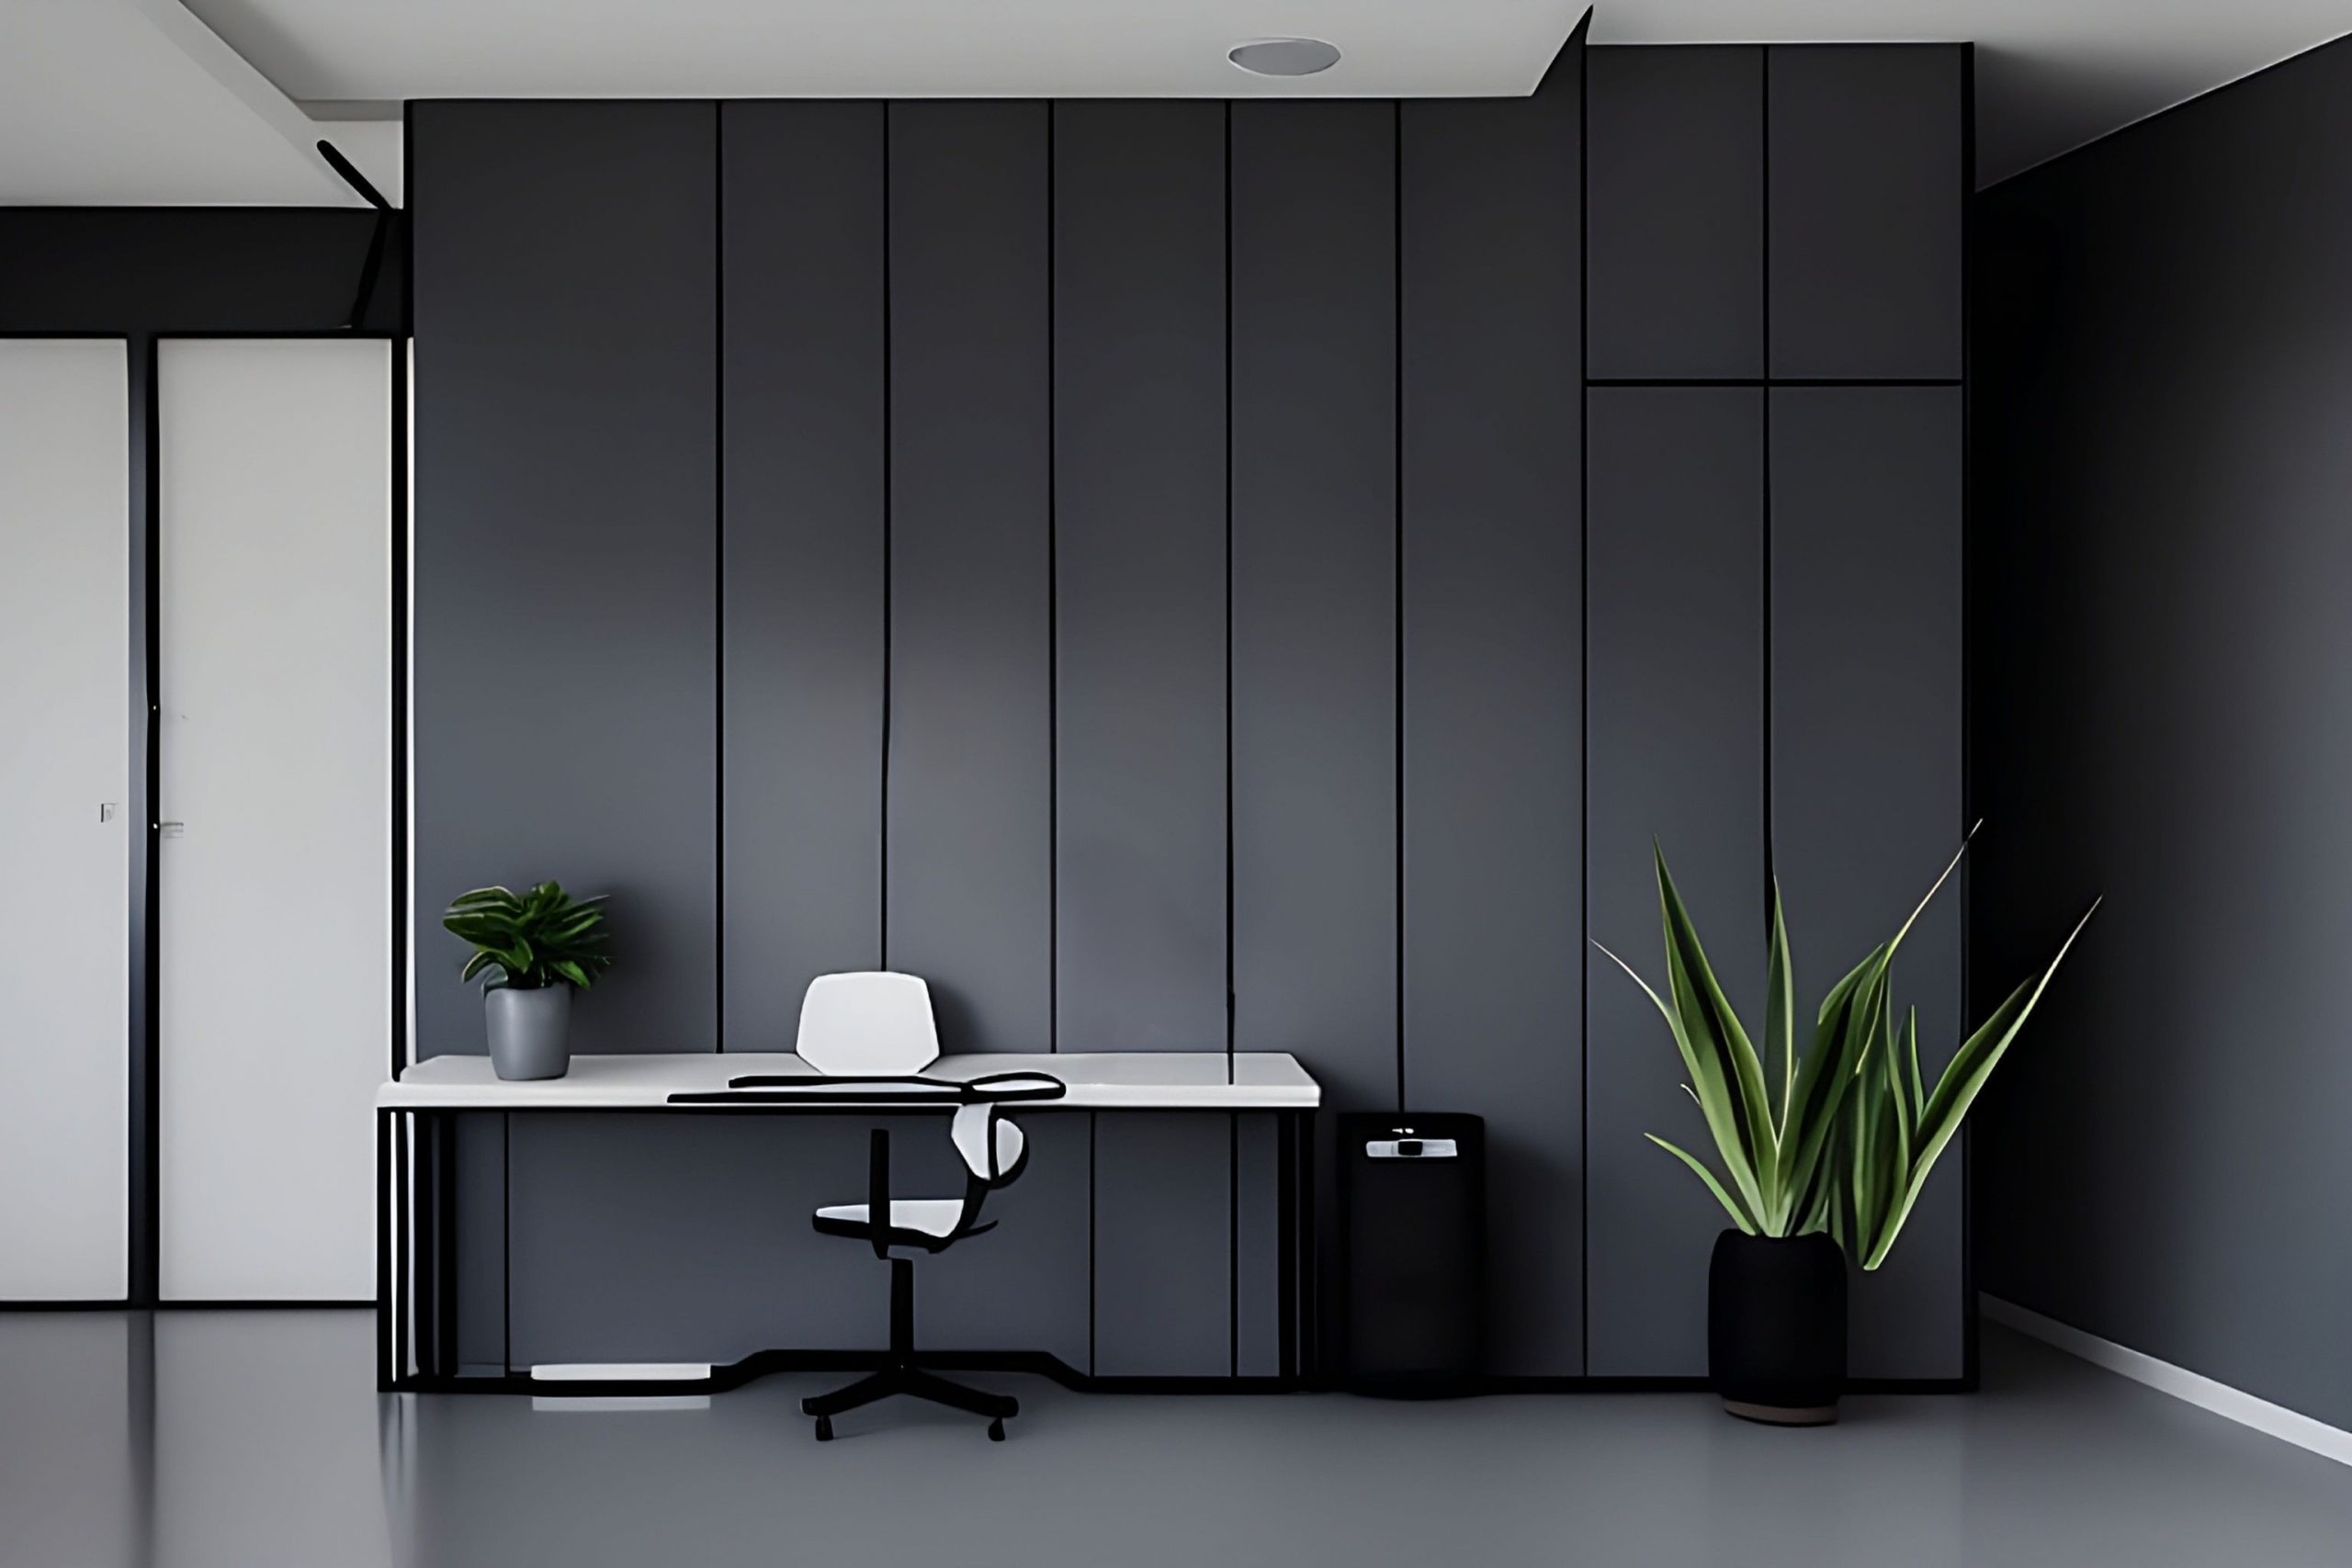 Free Office Room Background Image for Mockup